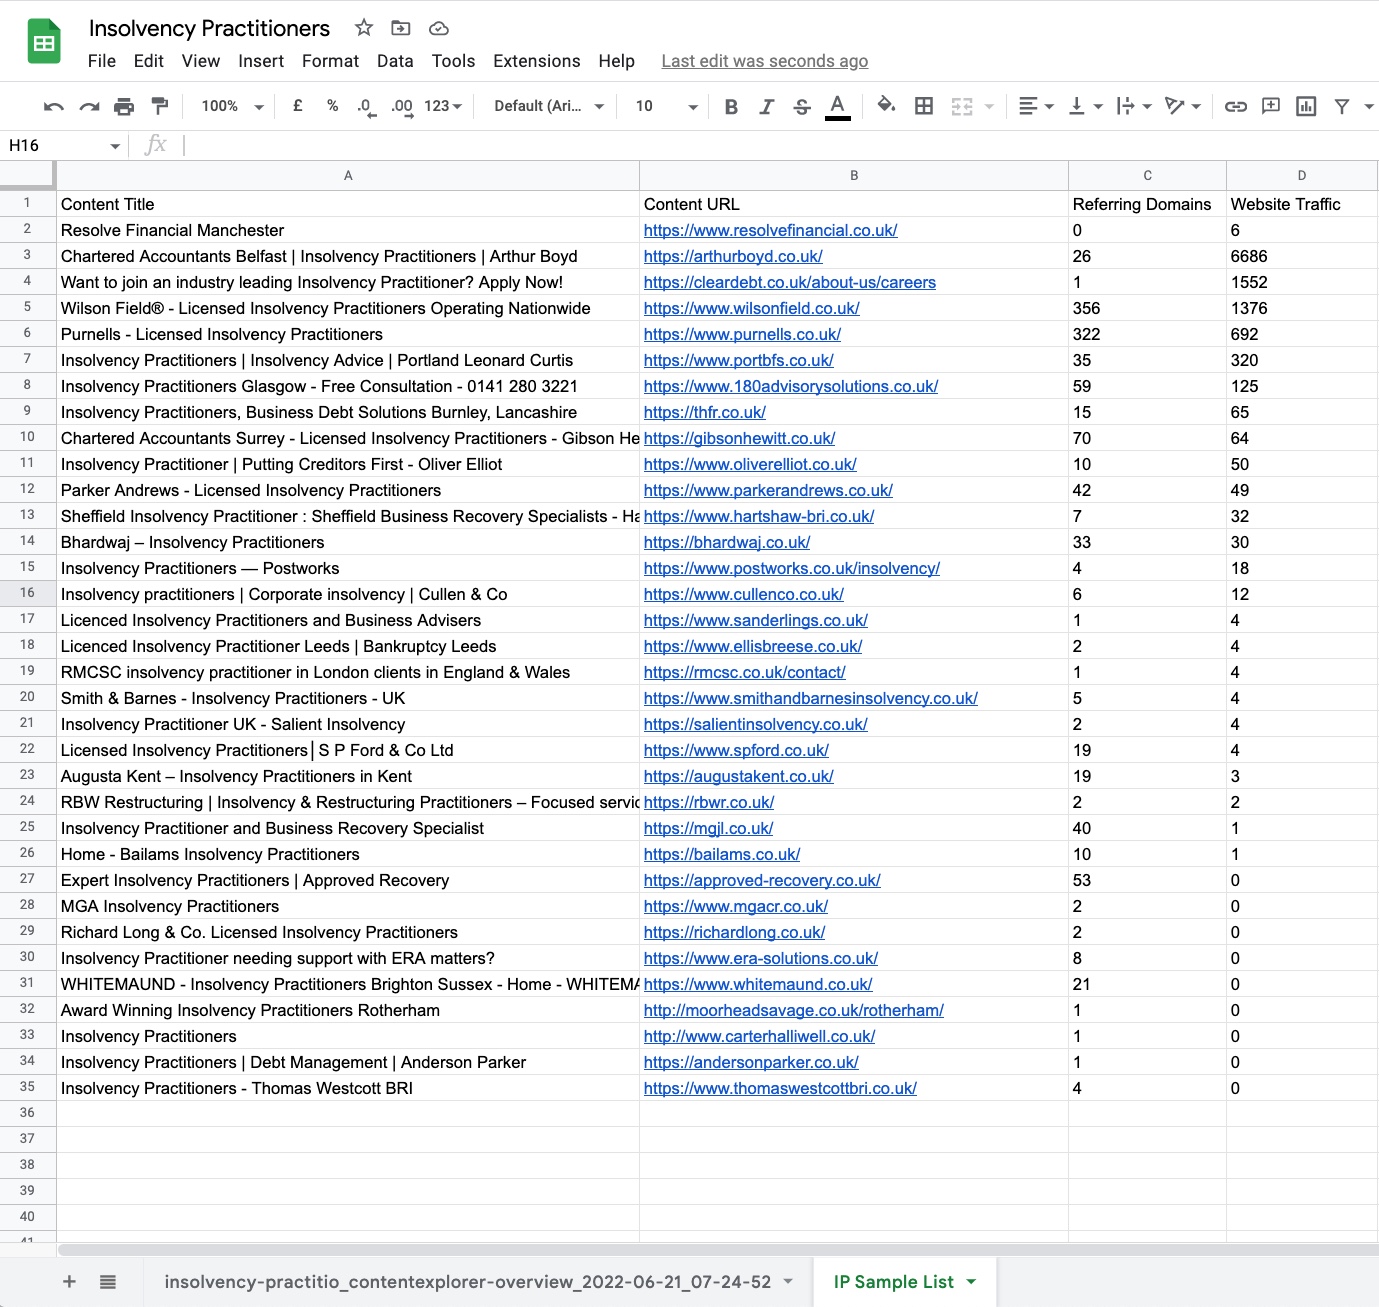 Cleaning up exported data from Content Explorer